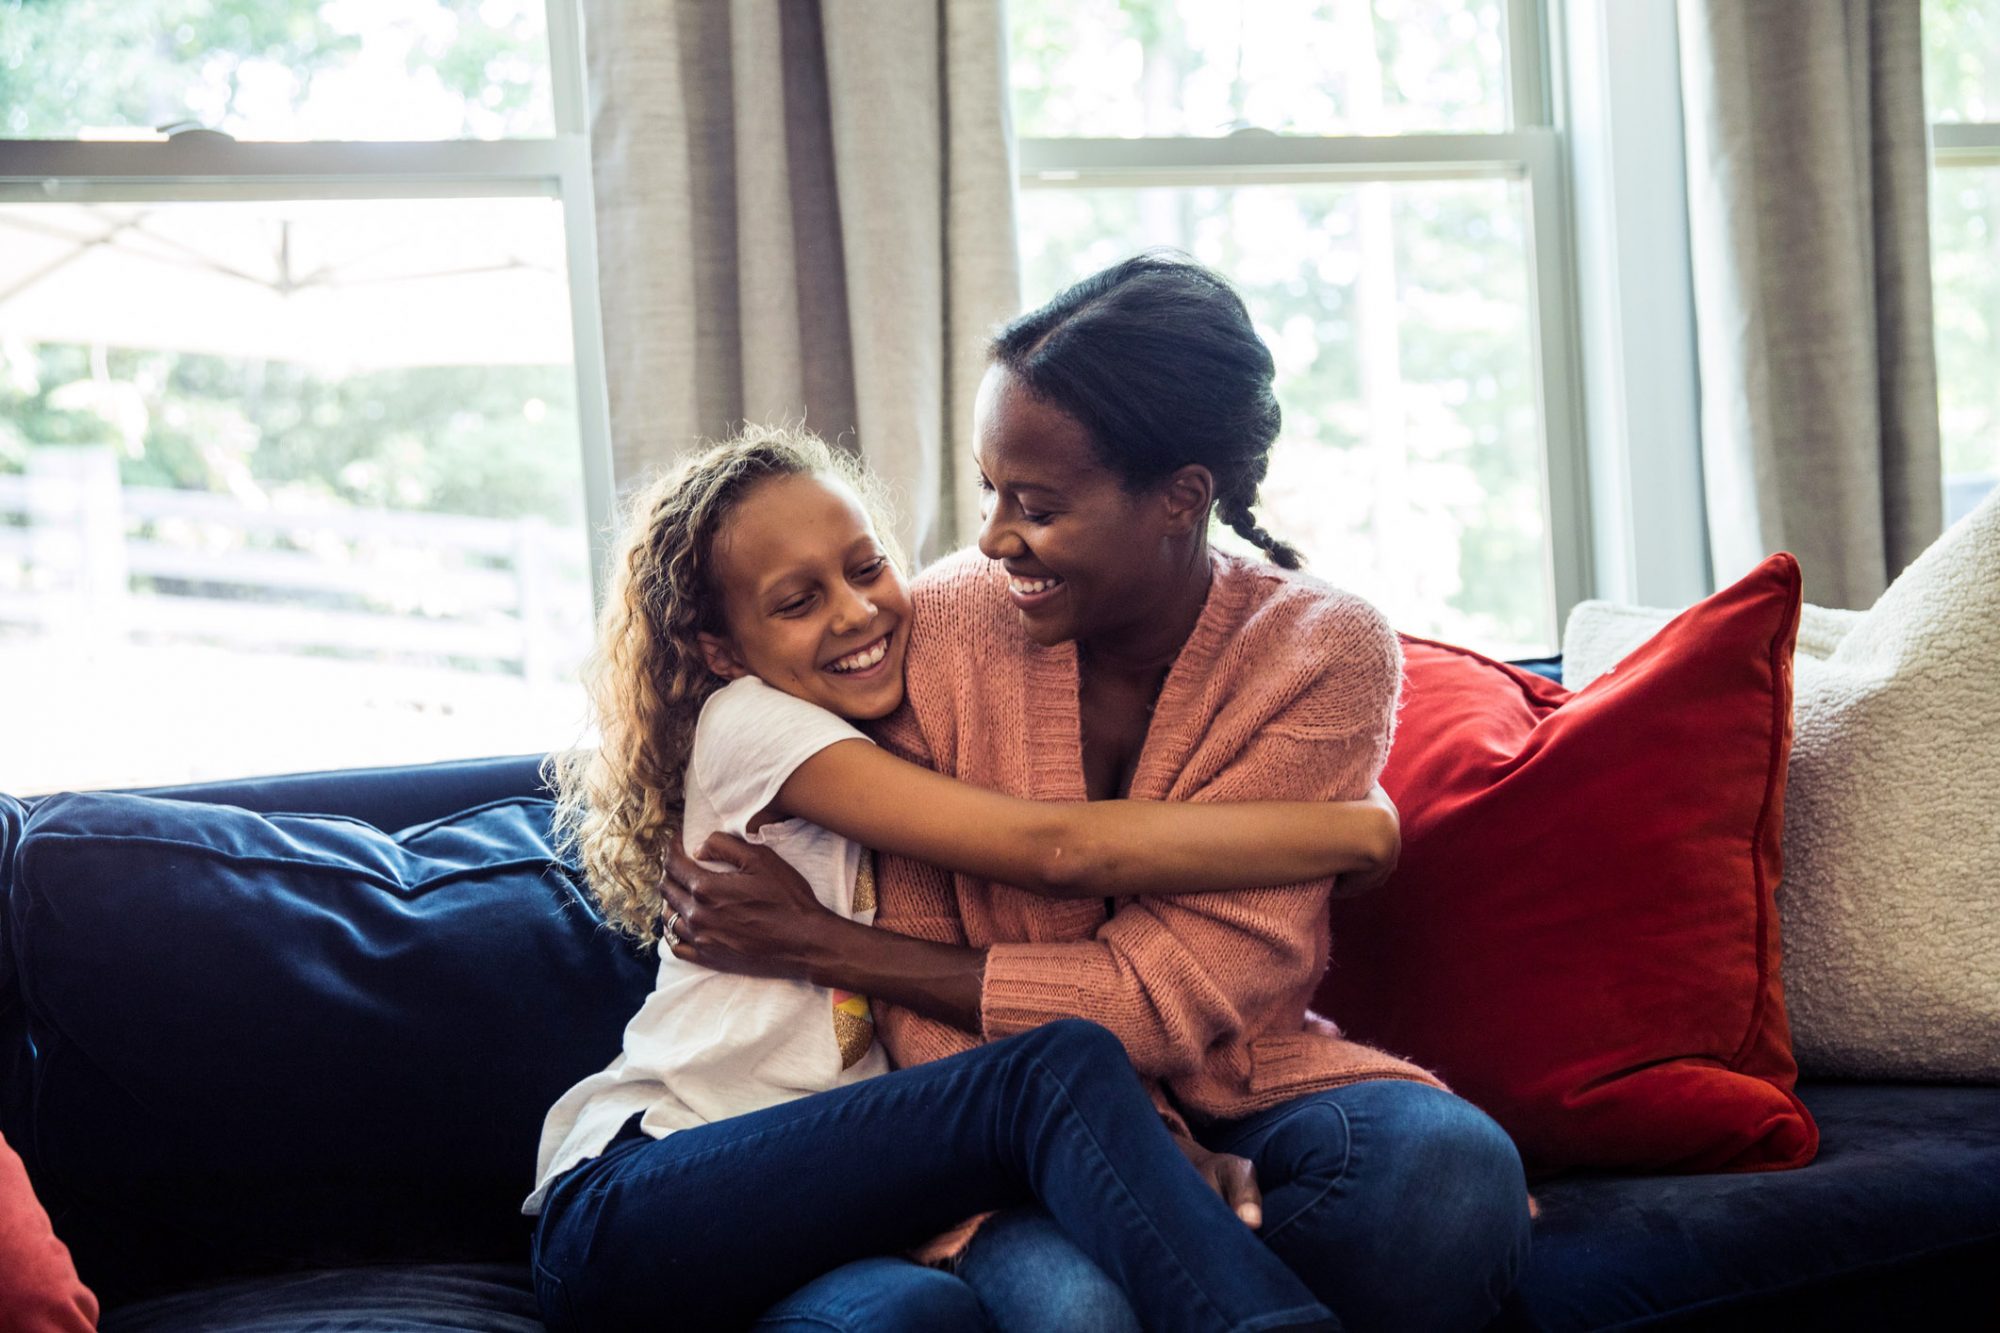 An image of a mom and daughter hugging on a couch.